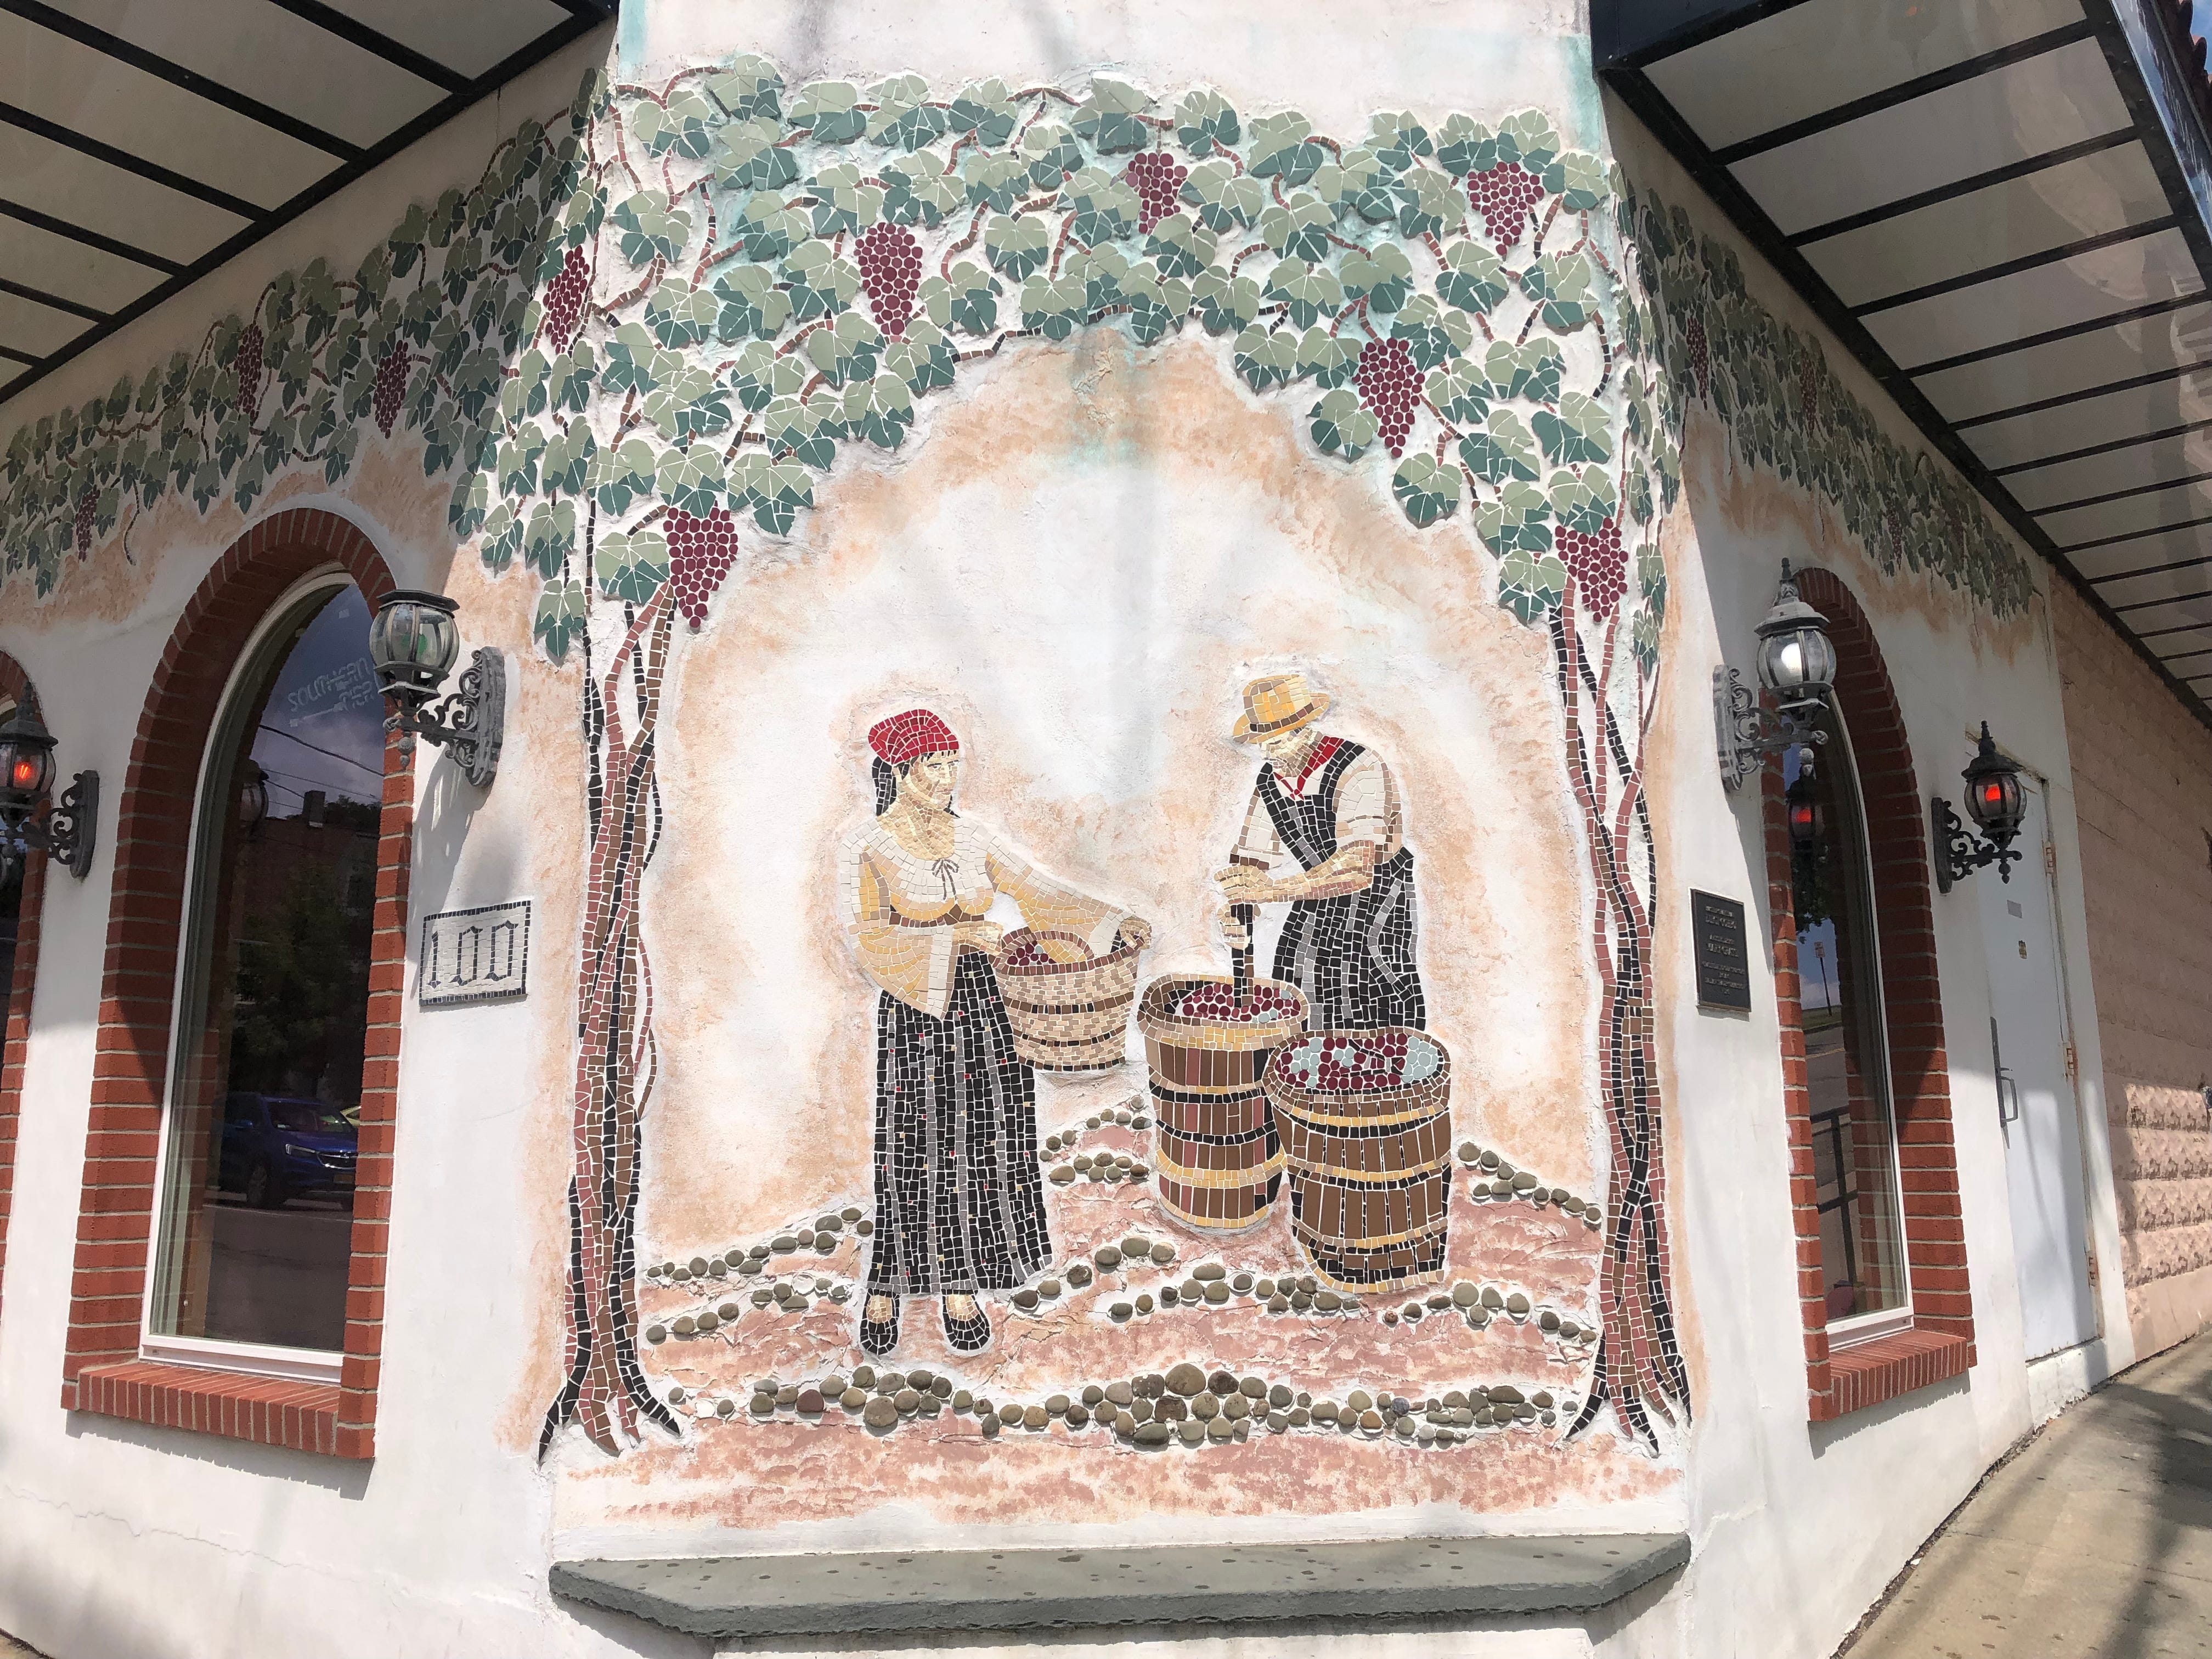 The mosaic that fills the corner of Antonio's Bar & Trattoria at 100 Oak Hill Ave. in Endicott was crafted by Mary Grassi and Luigi Gobbo.